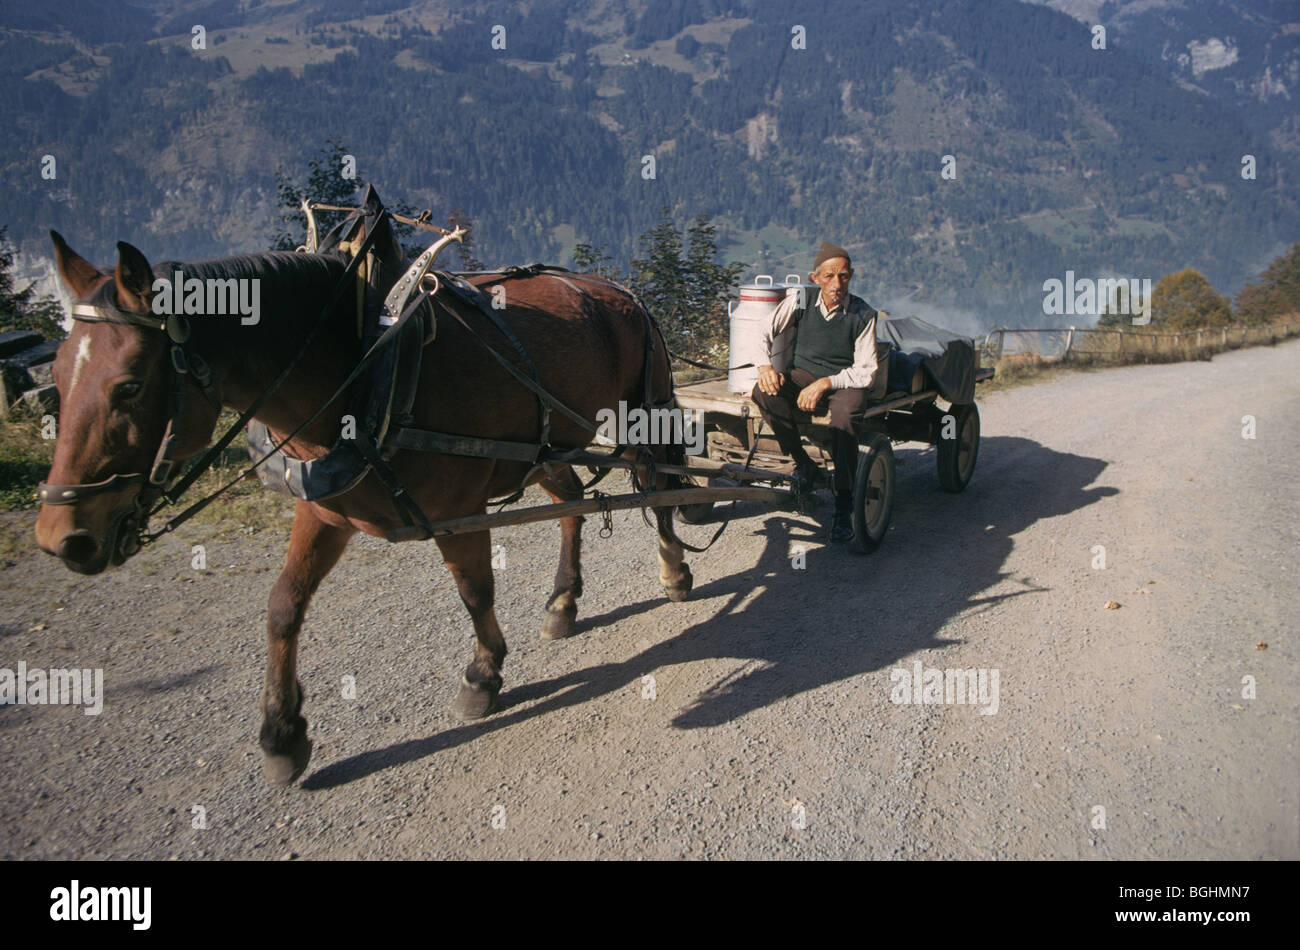 An elderly farmer on a horse cart hauls cans of milk from his farm to the village of Wengen, Switzerland Stock Photo